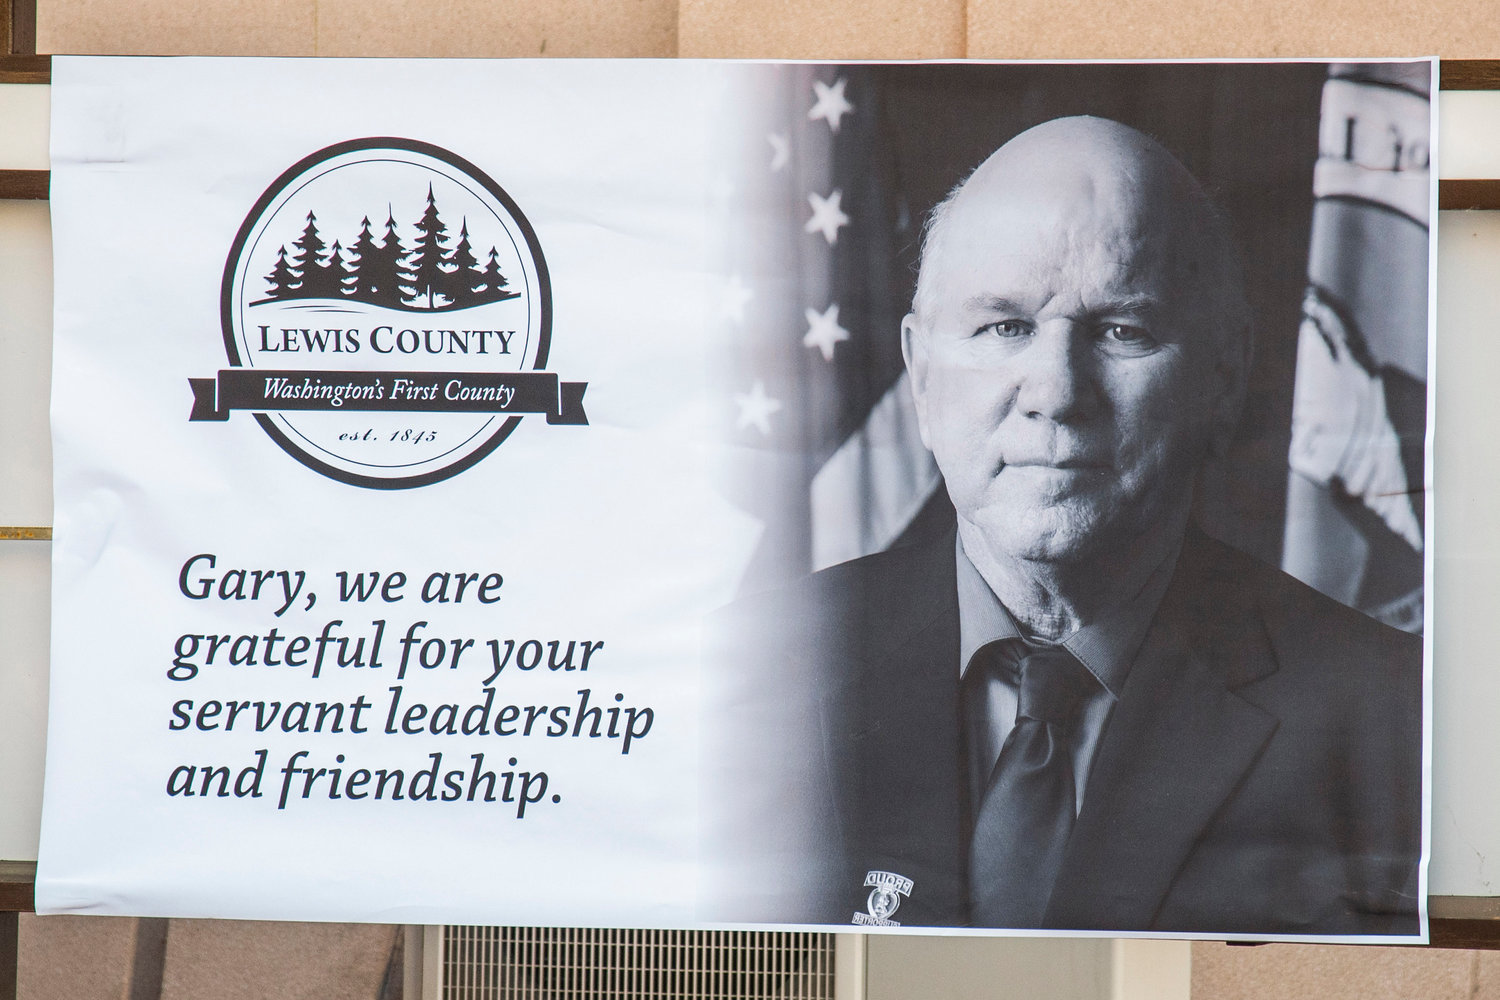 Signage outside the Lewis County Historic Courthouse reads, “Gary, we are garetful for your servant leadership and friendship,” Friday morning in Chehalis.